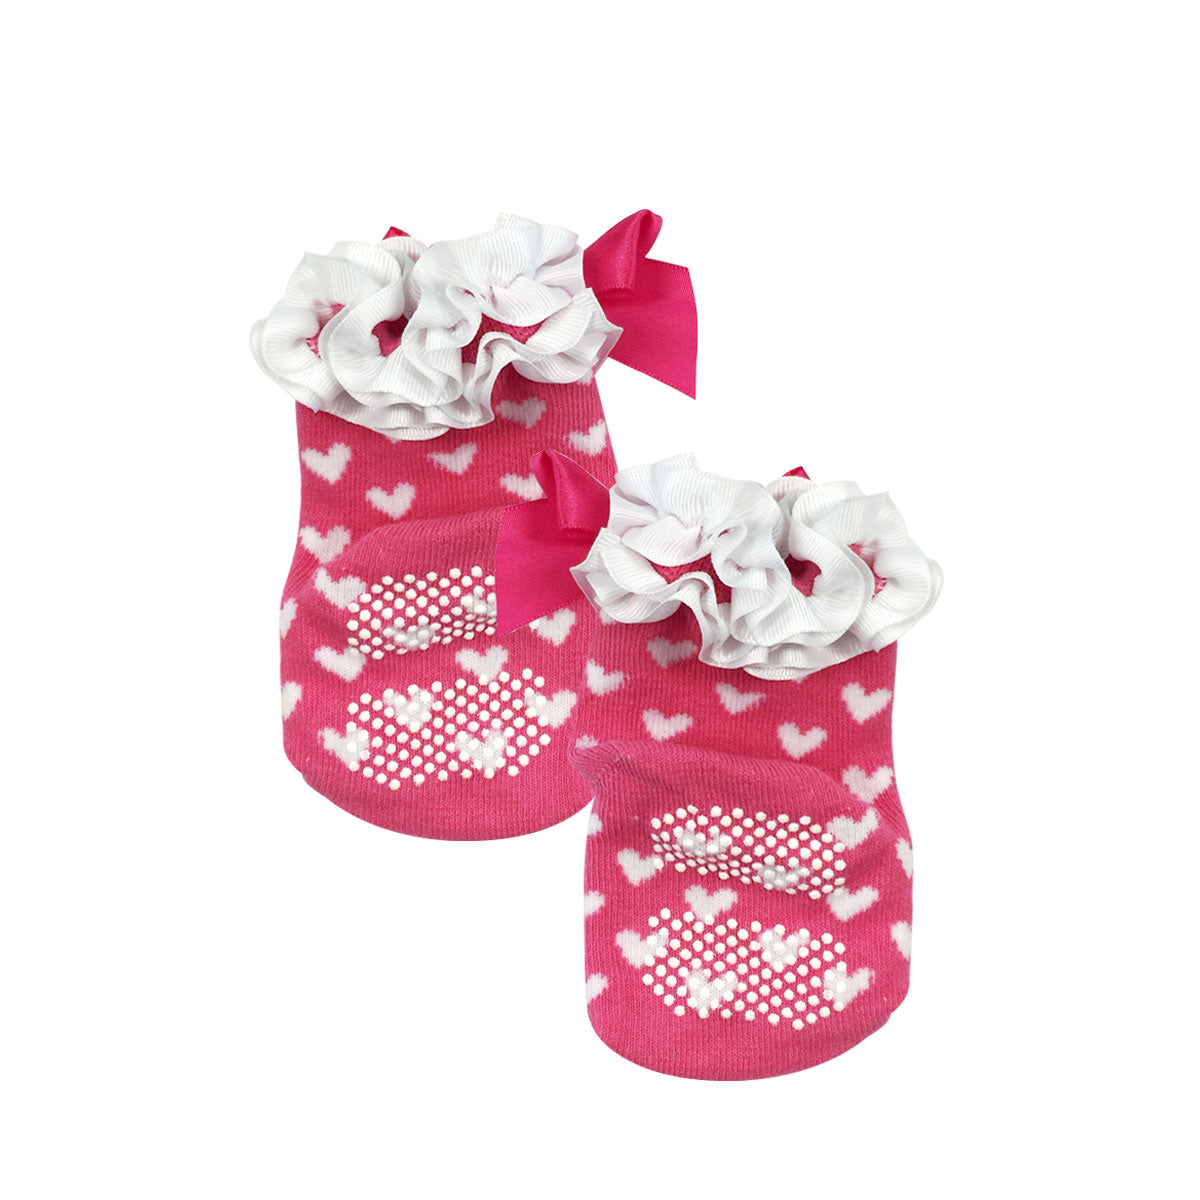 Wrapables Non-Skid Sweetheart Bows and Ruffles Socks (Set of 2)